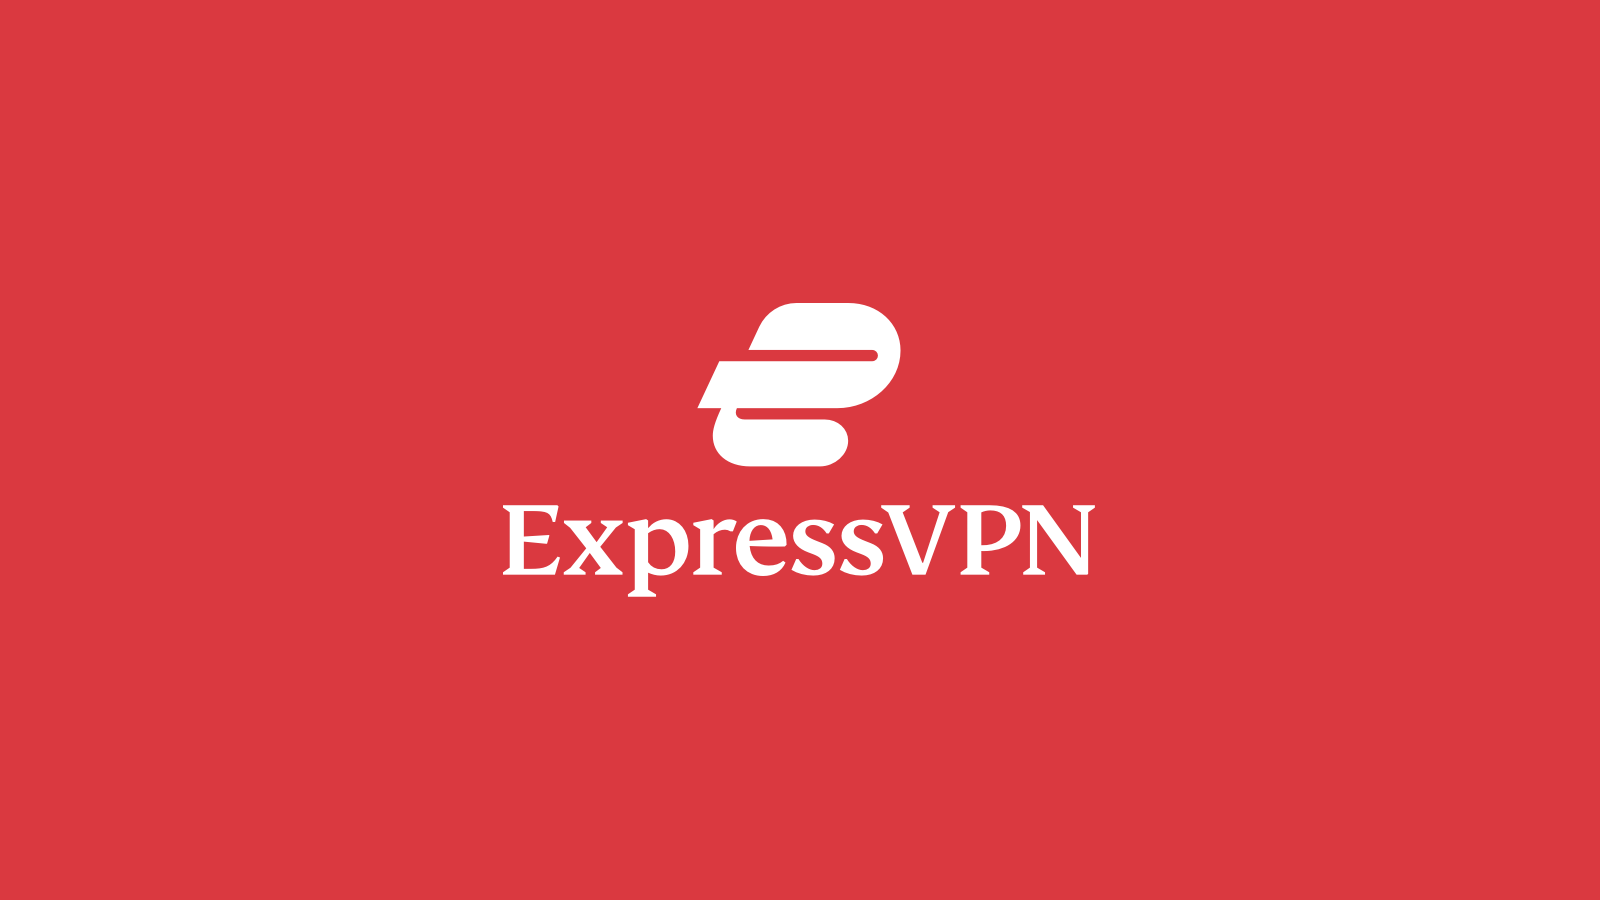 ExpressVPN is a secure and fast VPN